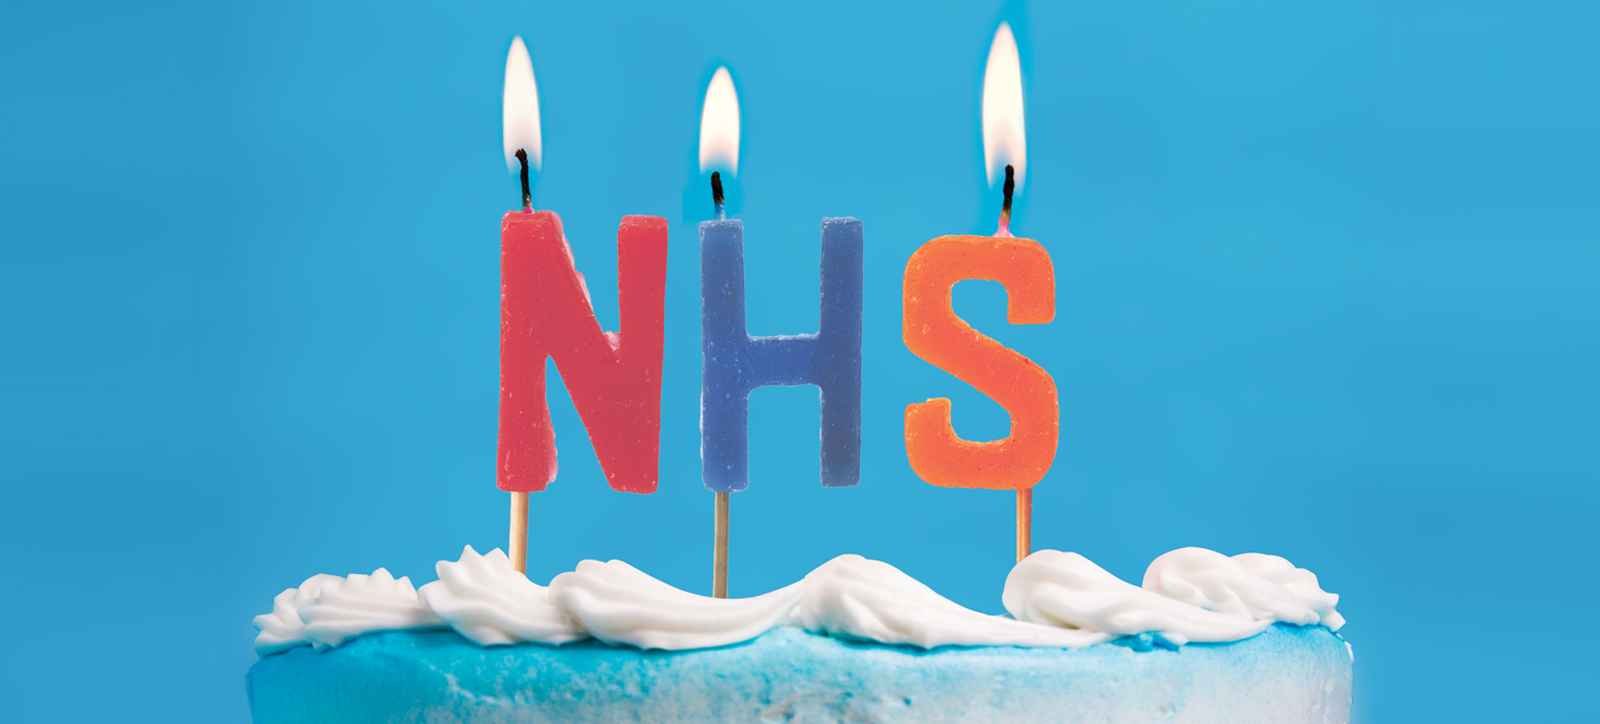 A cake with N H S candles to mark the 75th anniversary of the NHS.